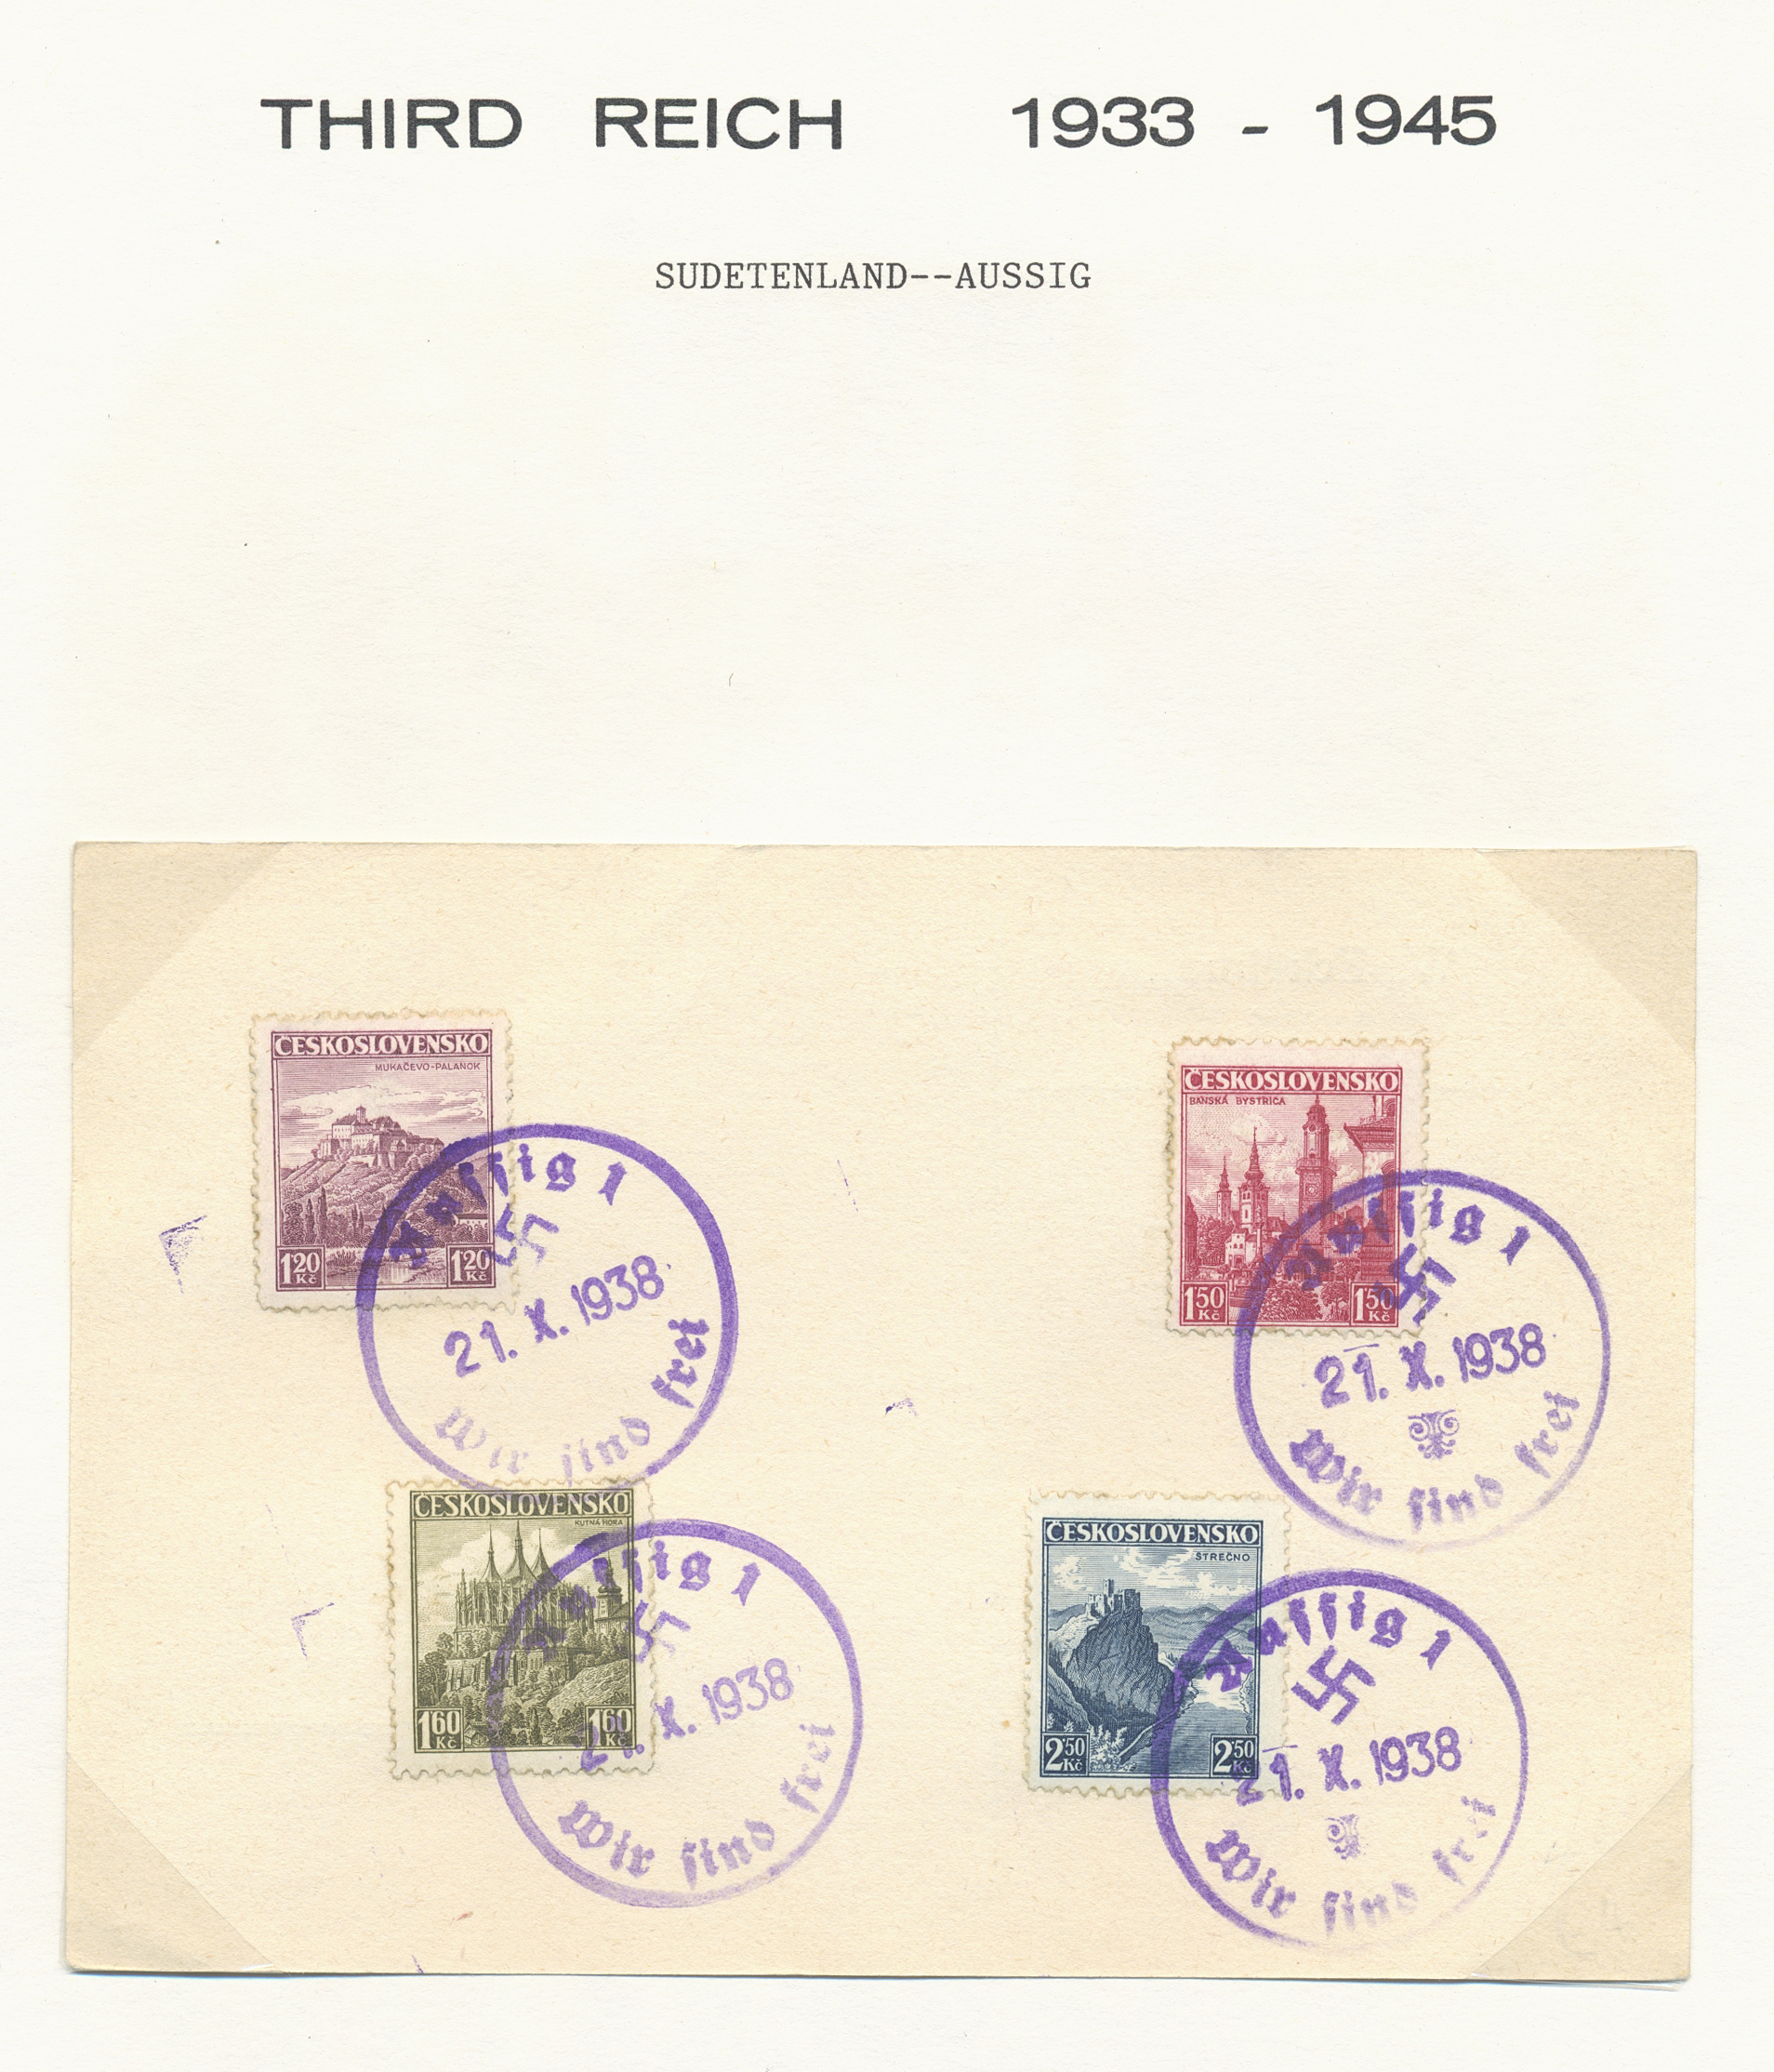 Lot 37078 - sudetenland  -  Auktionshaus Christoph Gärtner GmbH & Co. KG Sale #44 Collections Germany